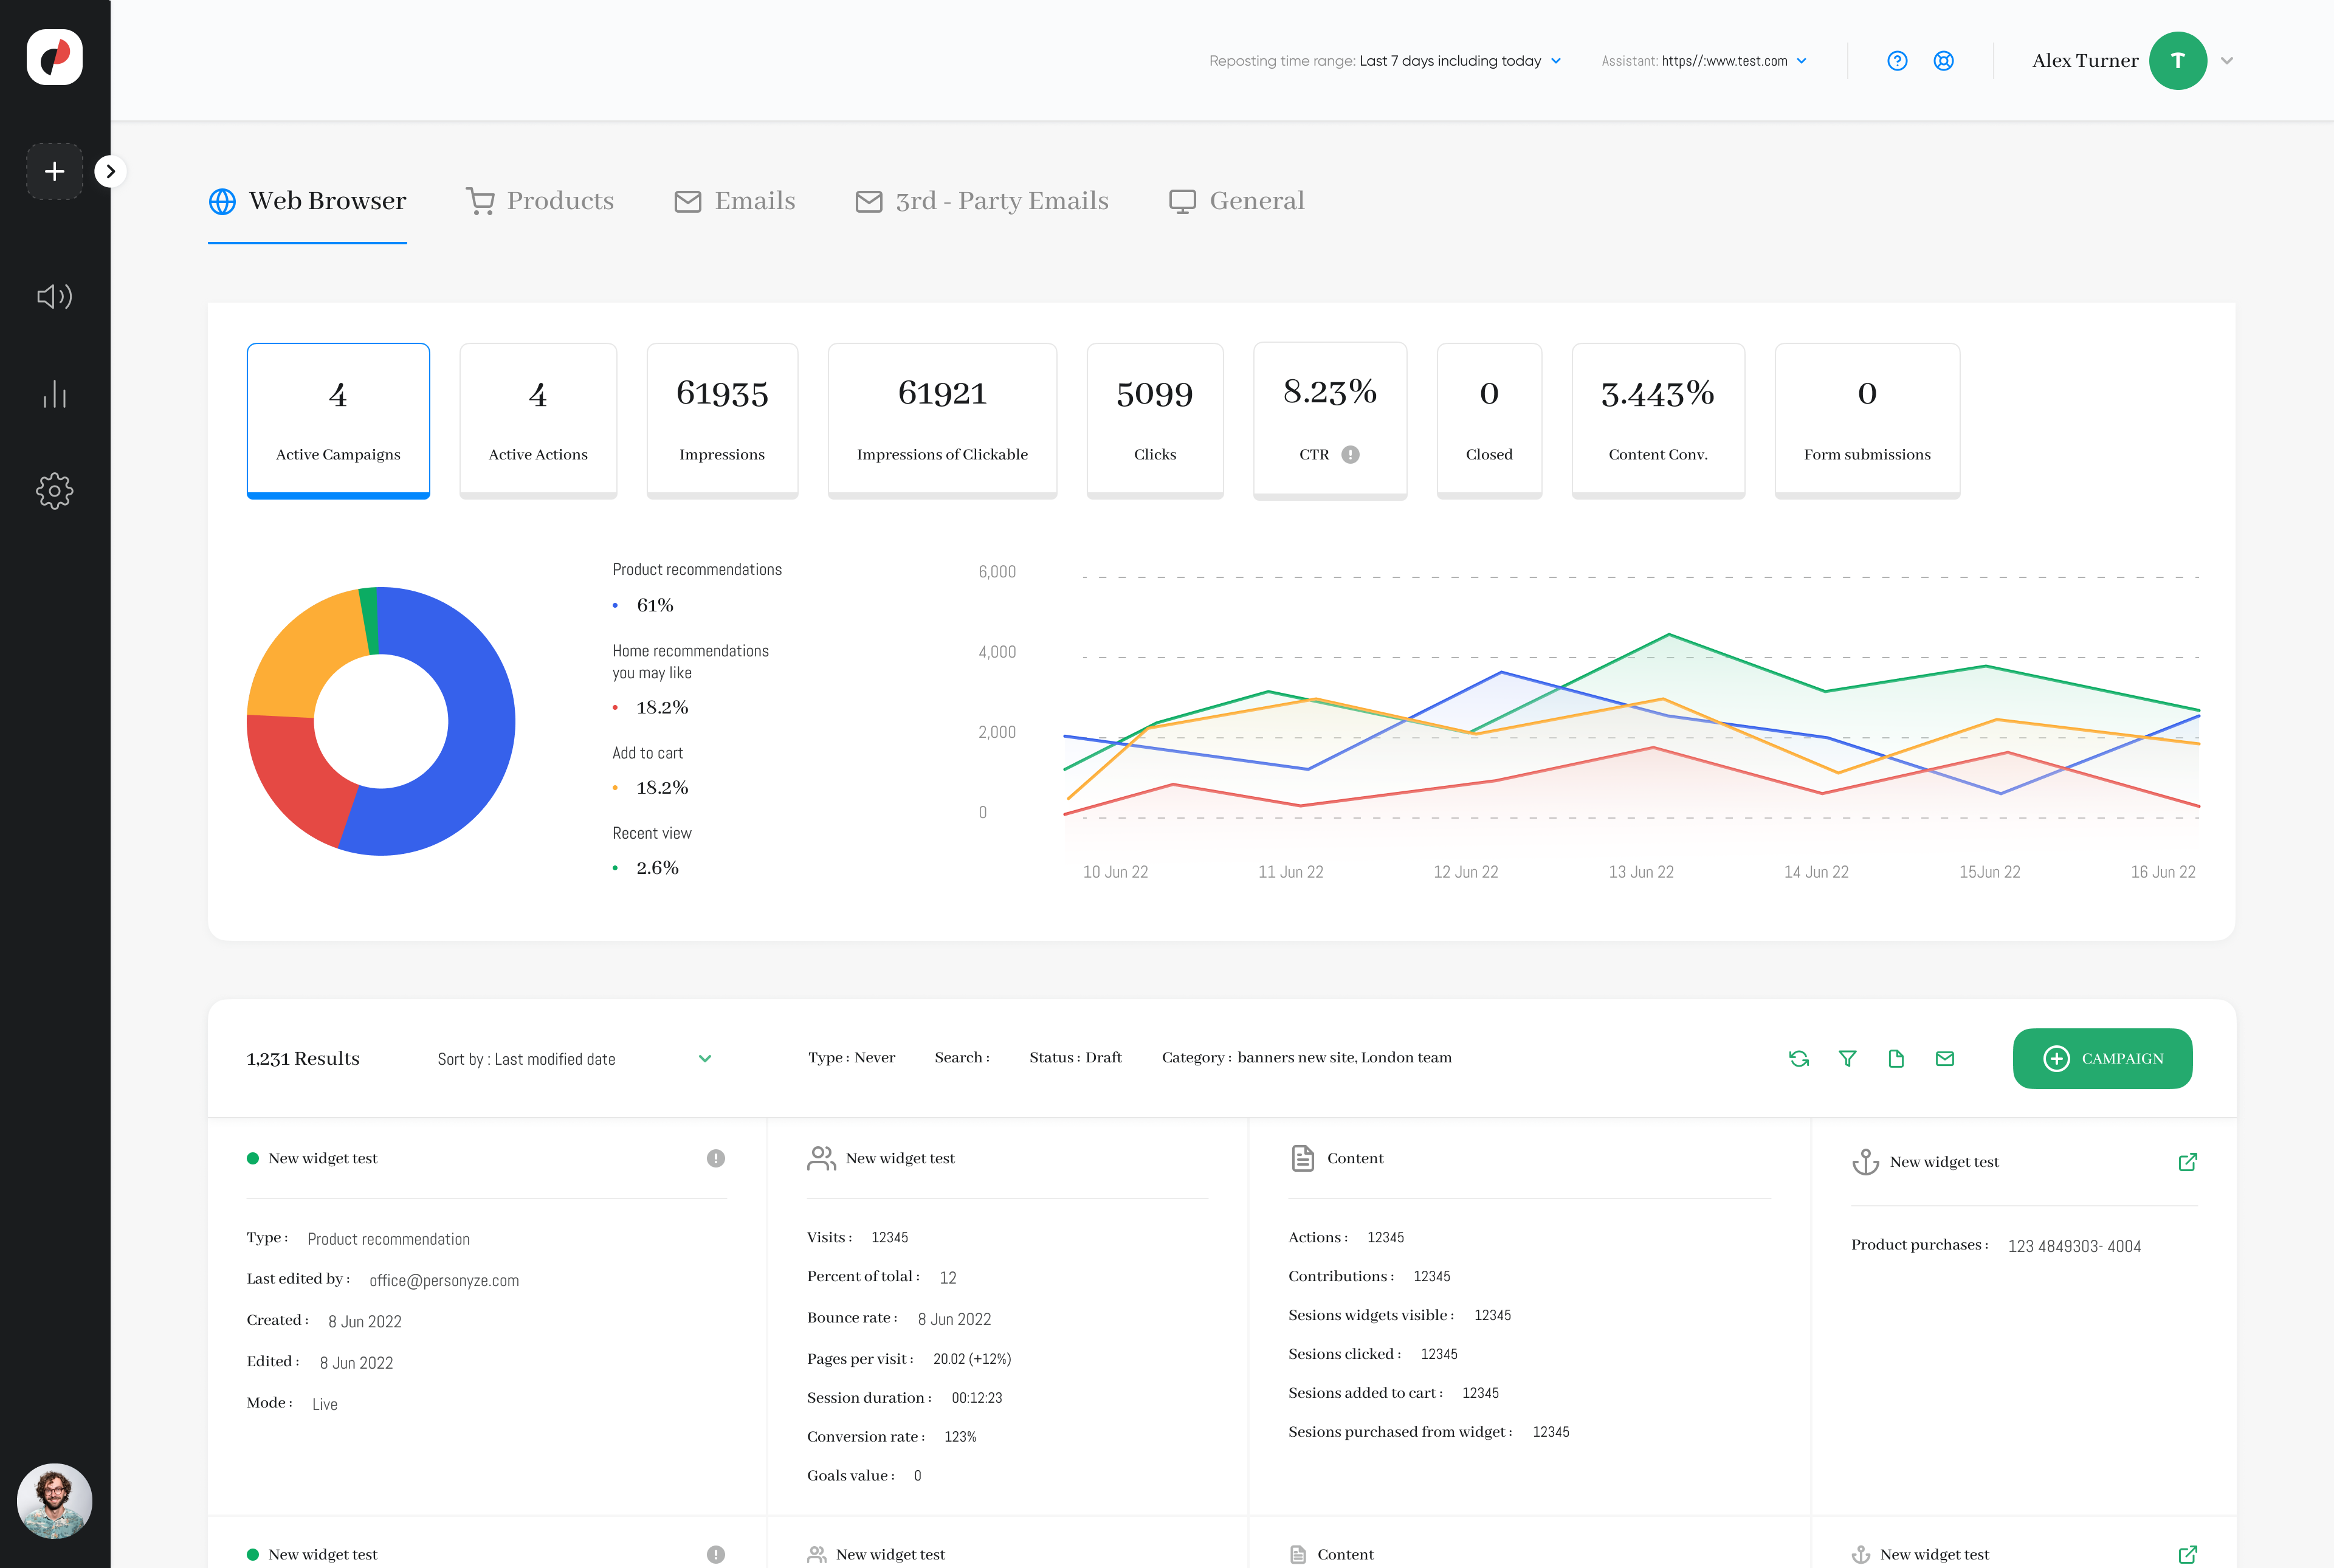 Personyze is automatically tracking views, impressions, clicks, and purchases, and can be set to track many more behaviors or sets of behaviors, all of which can be used as key metrics in A/B testing, displayed on a detailed reporting dashboard